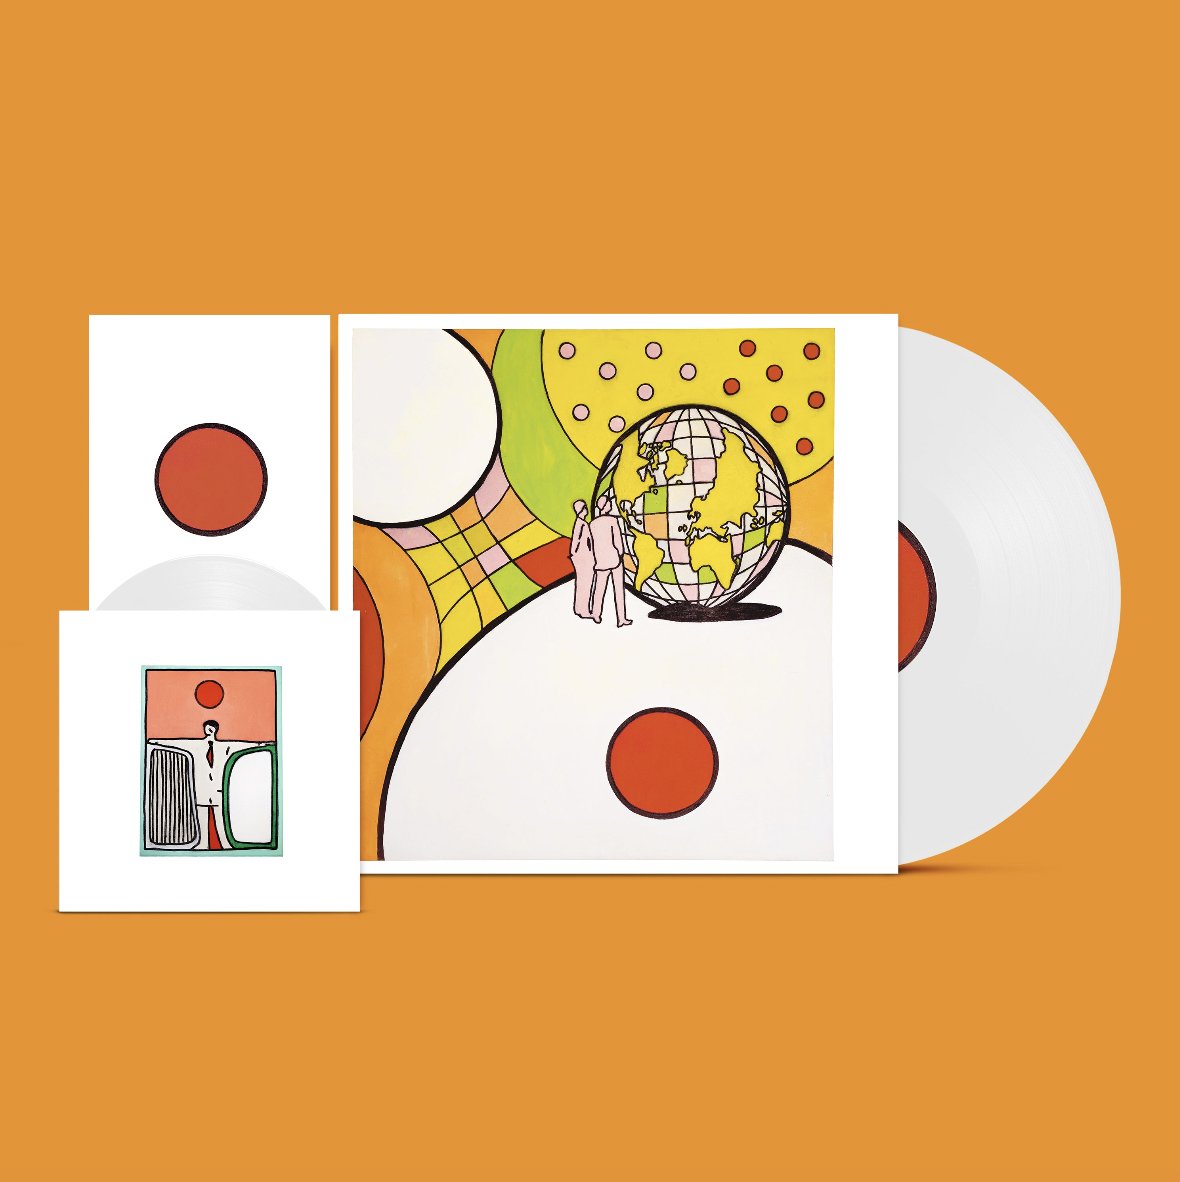 PRE-ORDER! @dinkededition no. 300! @prsnl_trnr 'Still Willing' LP on @bellaunion - White vinyl - Bonus ‘Intagible’ white 7” featuring White Denim remix - 16 Page A5 Fanzine - Signed Trading Card - Limited pressing of 600 beartreerecords.com/products/perso…